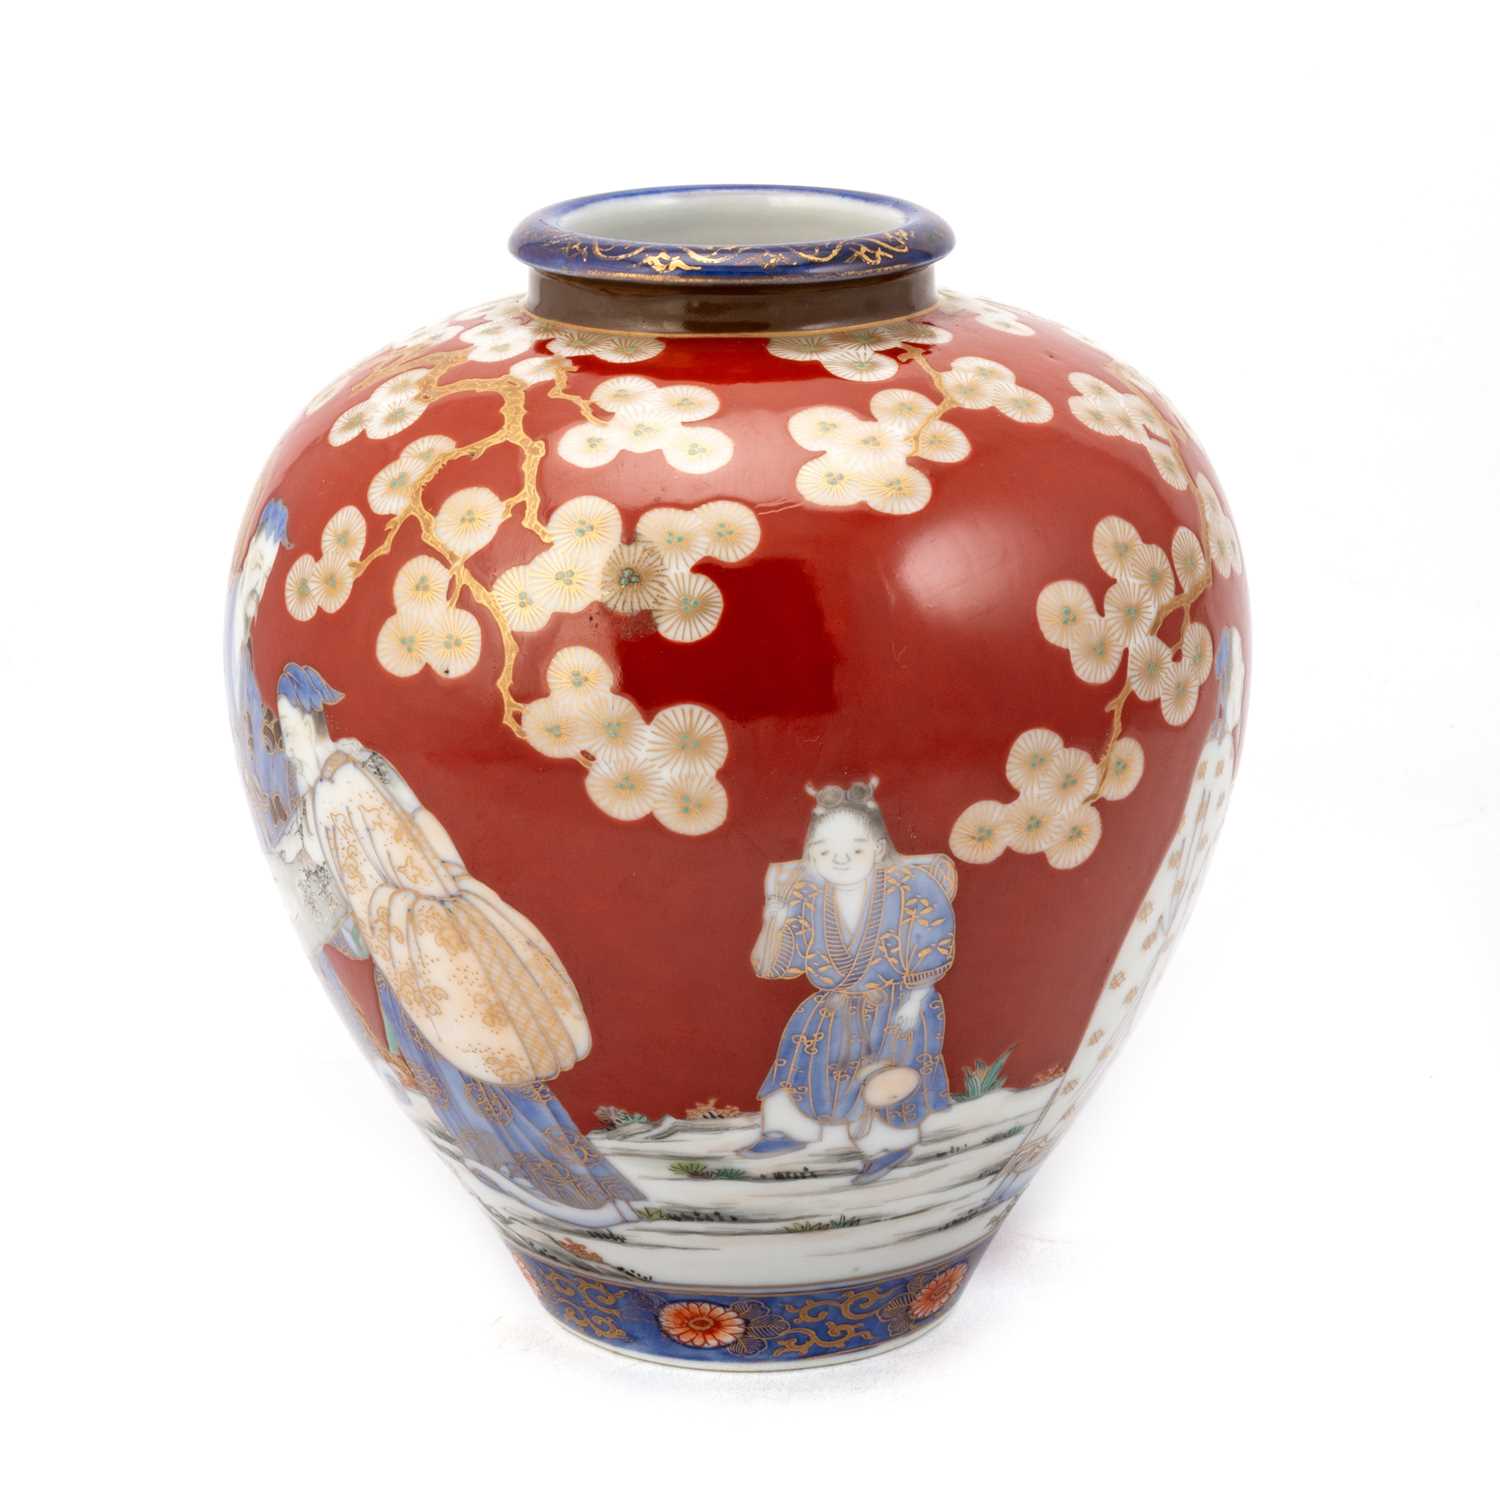 A FUKAGAWA RED-GROUND VASE, JAPANESE, EARLY 20TH CENTURY - Image 3 of 3